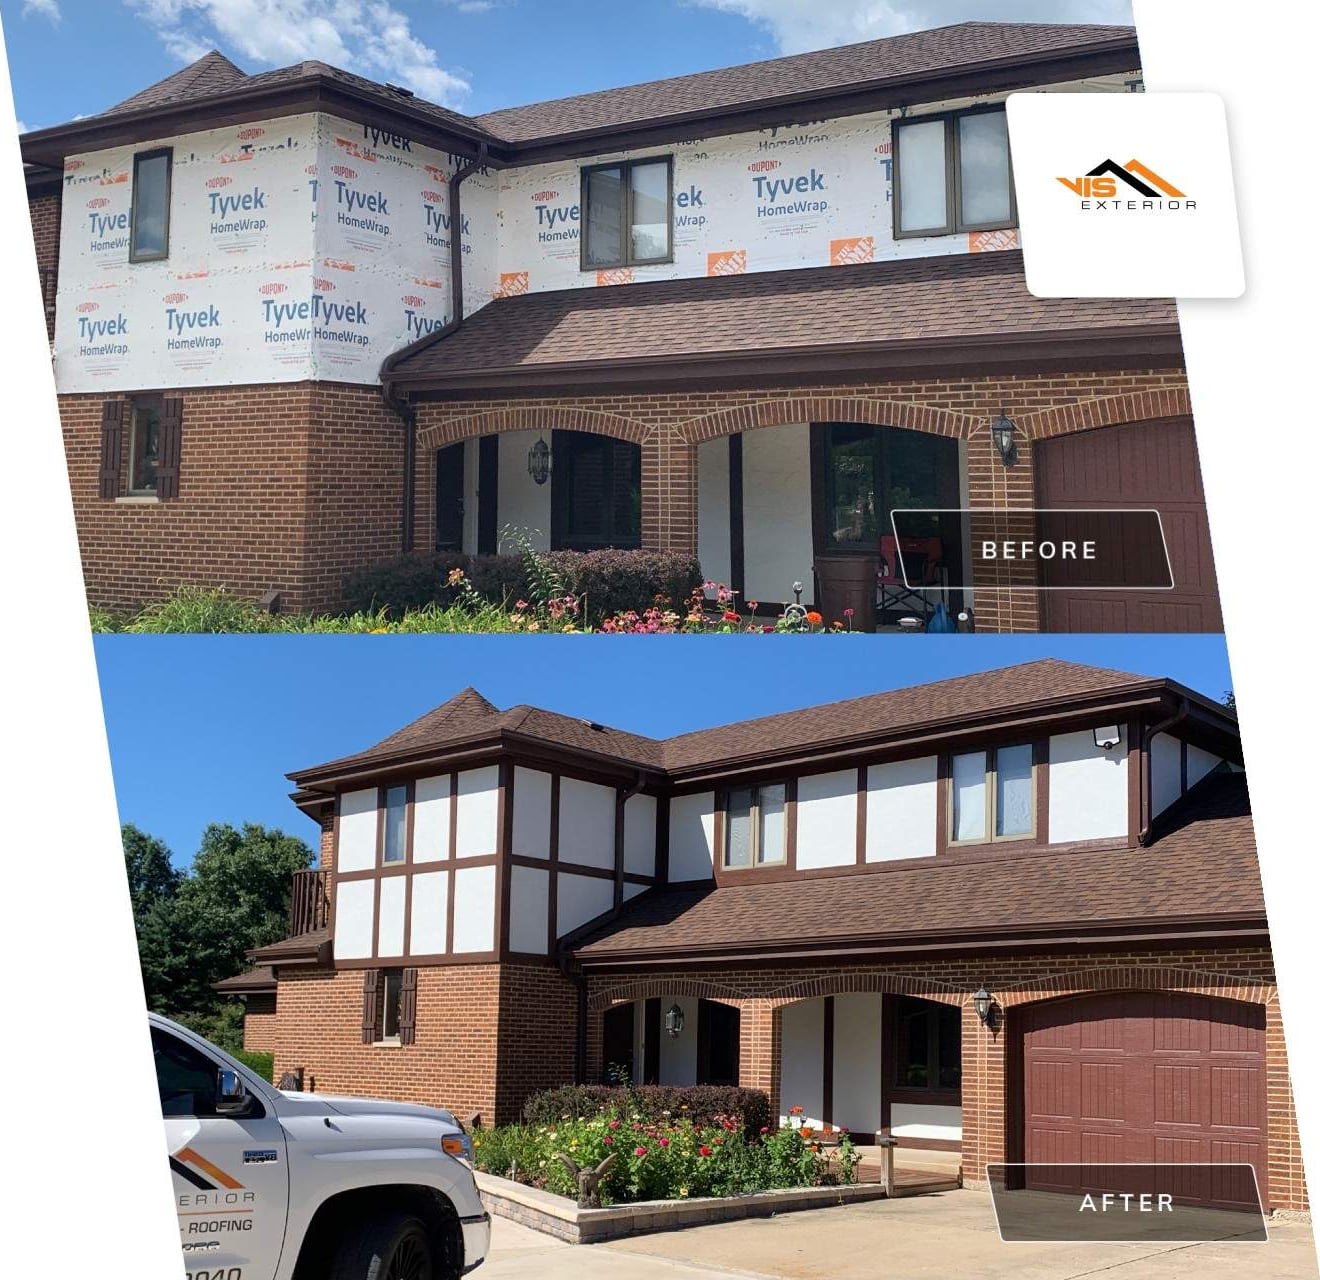 James Hardie Stucco Panel Vertical siding installation in Wayne before after project photo